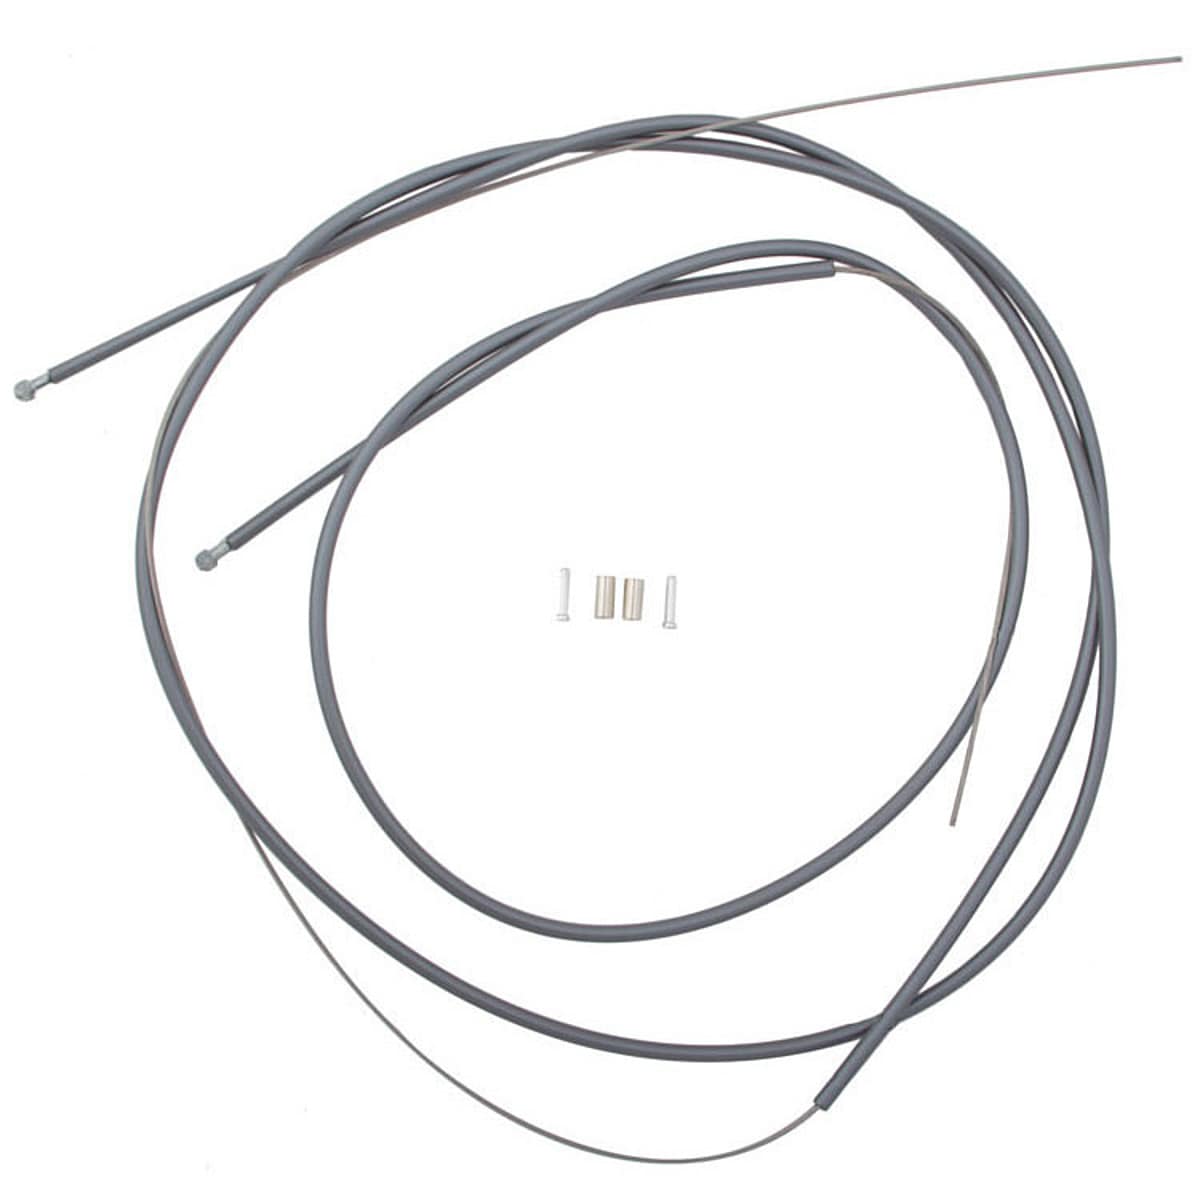 Shimano PTFE Brake Cable & Housing Grey, One Size